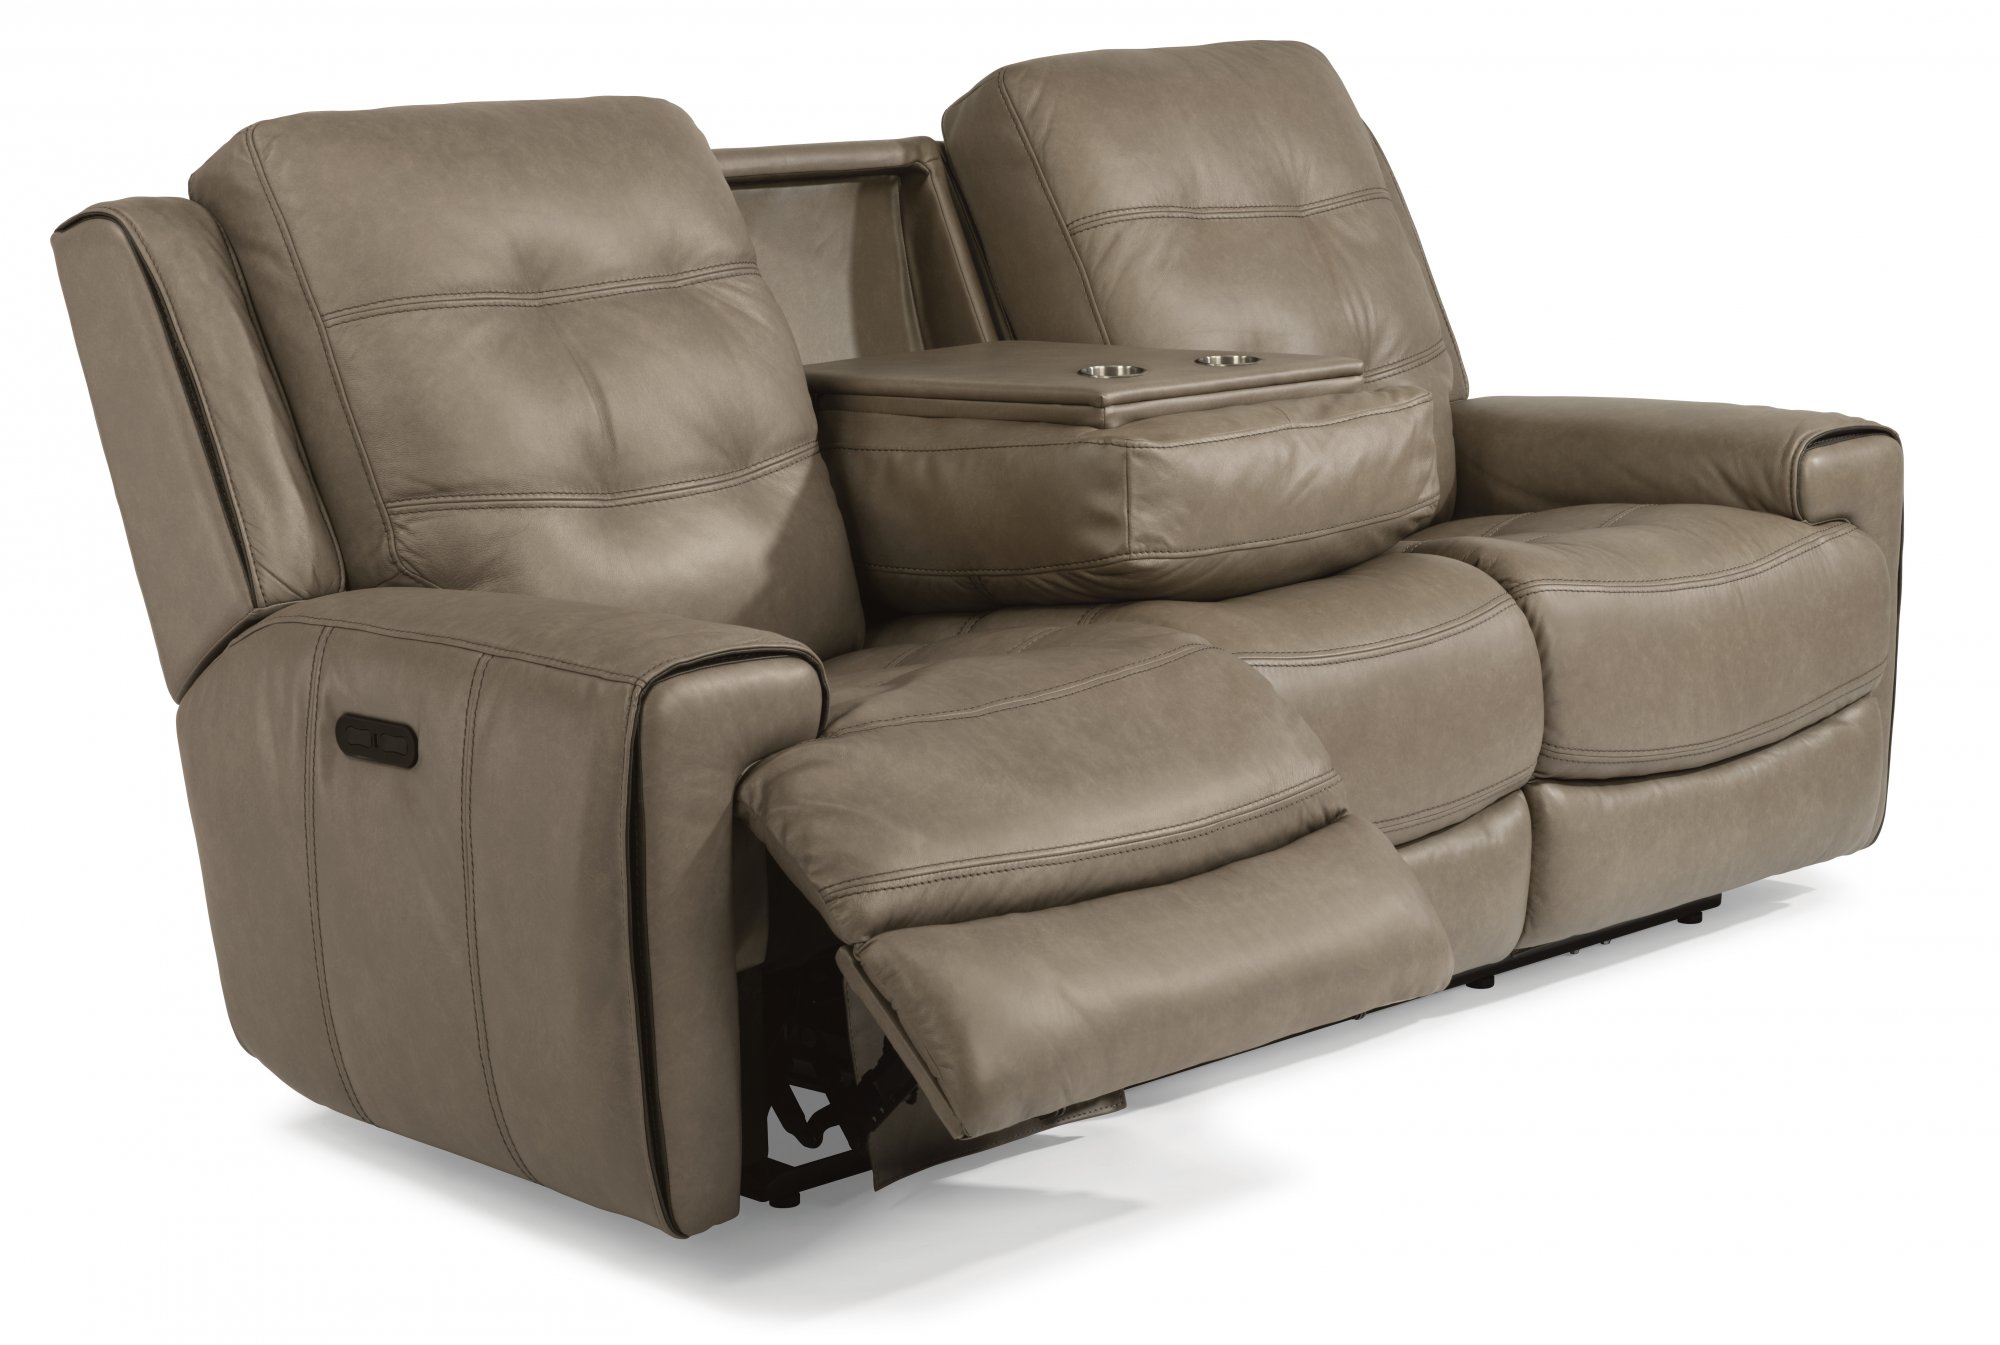 sofa recliner share via email download a high-resolution image QRMLWRG